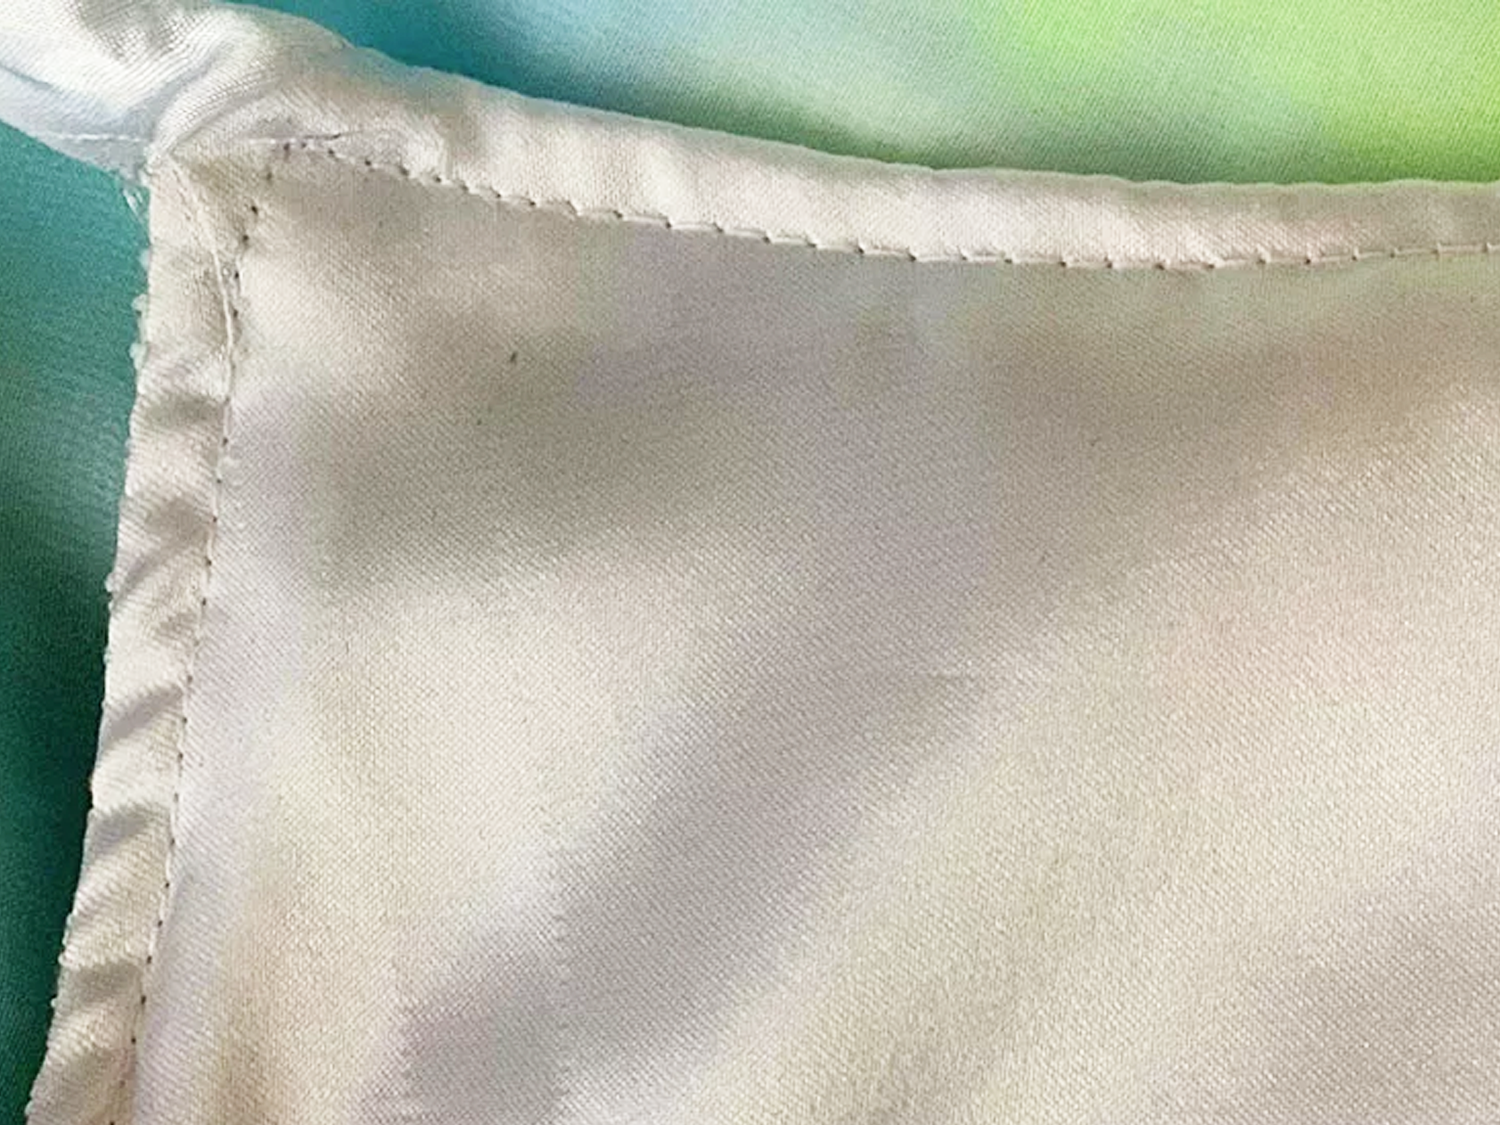 7 Types Of Hem Finish And Their Uses - Dream. Cut. Sew